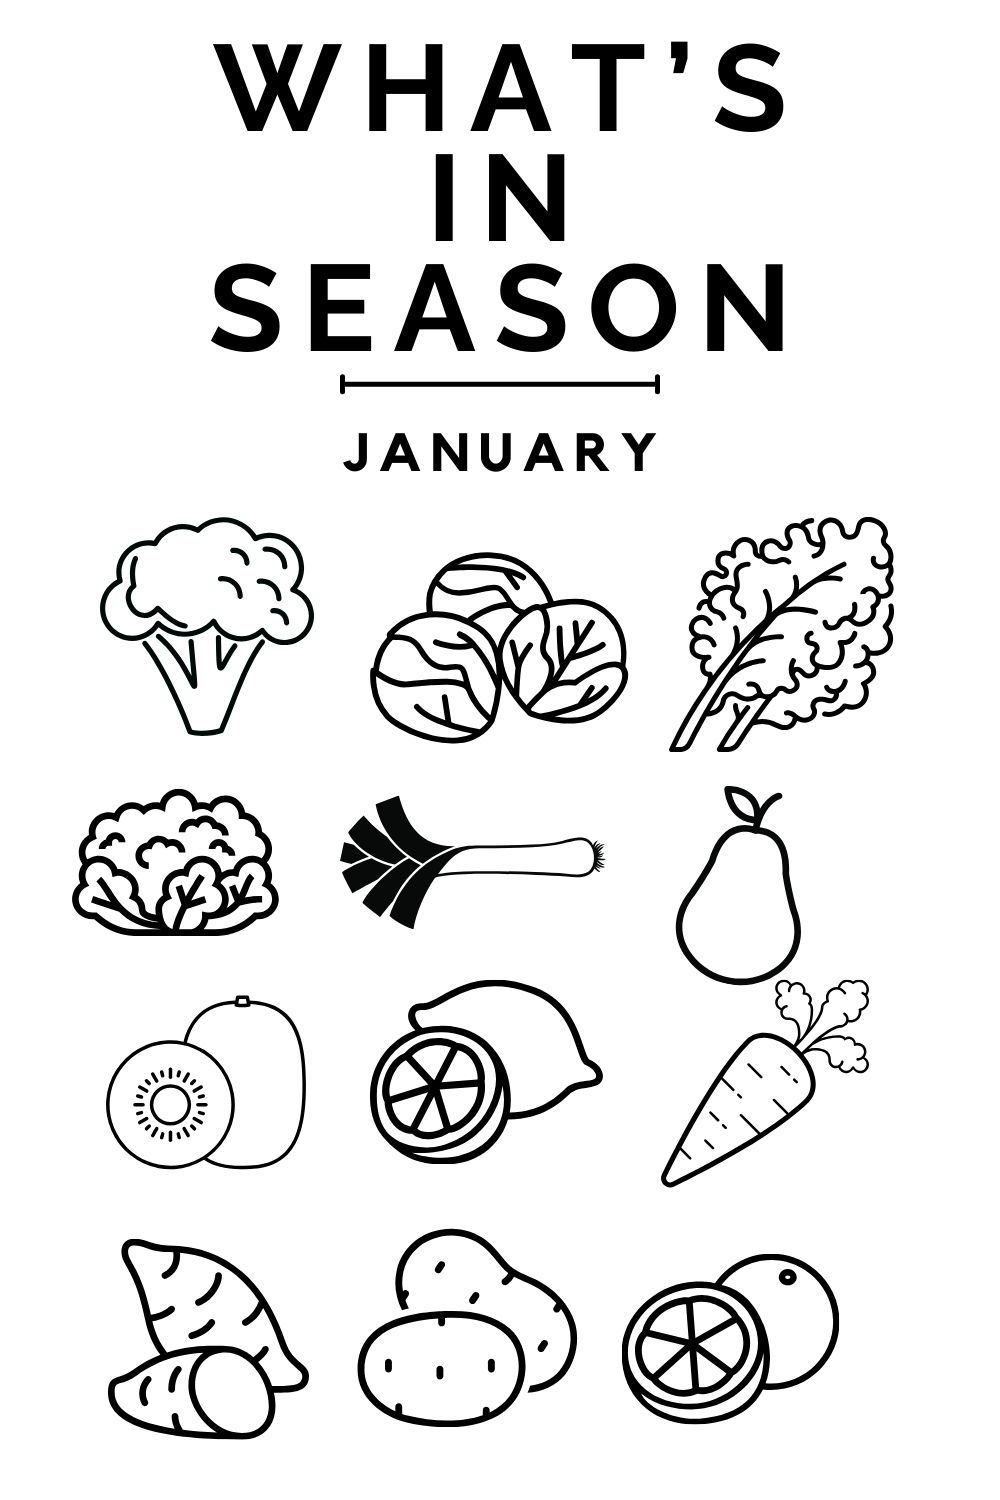 What's in season january coloring page.